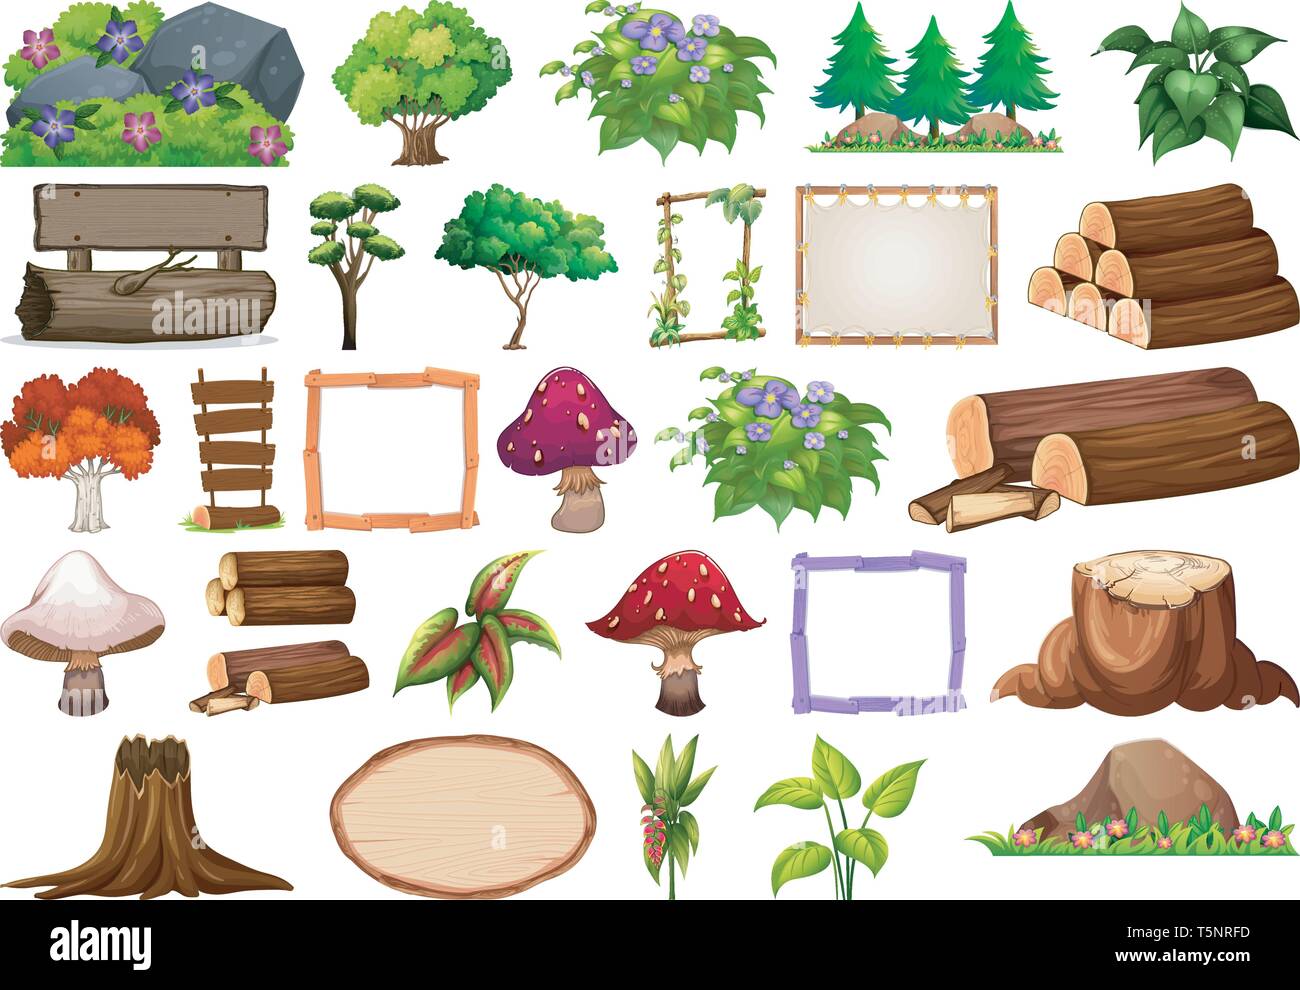 Set of nature items illustration Stock Vector